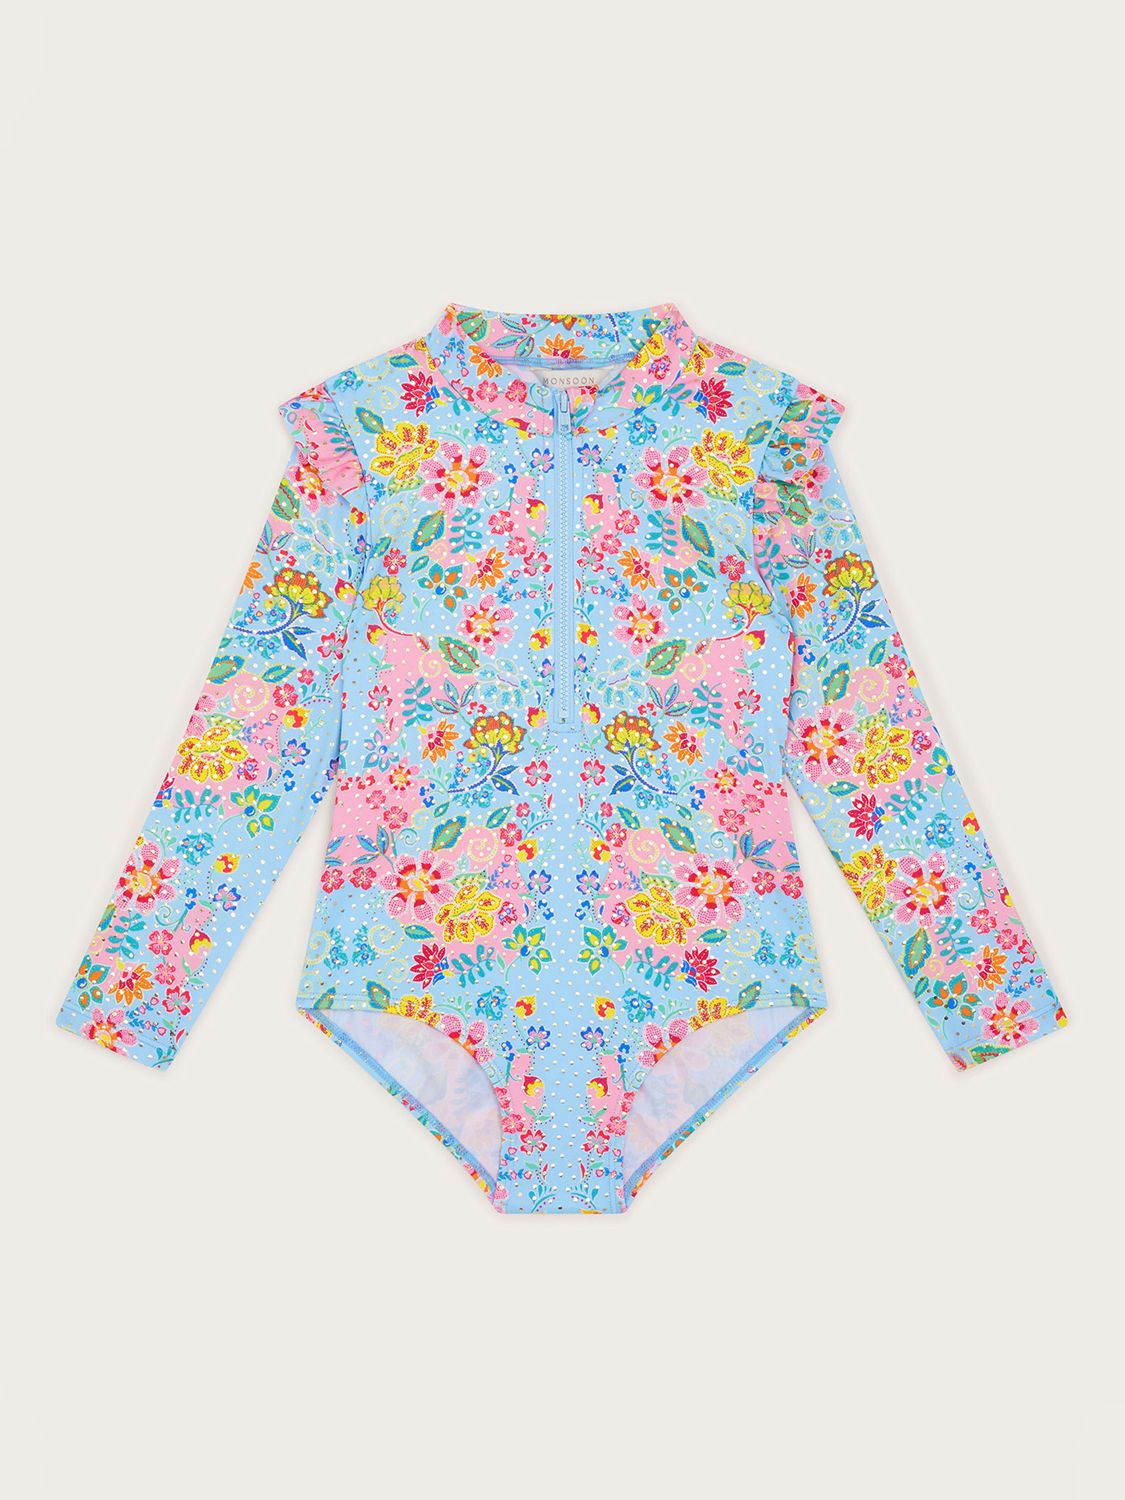 Monsoon Kids' Foil Floral Frill UPF50 Long Sleeve Swimsuit, Blue, 3-4 years